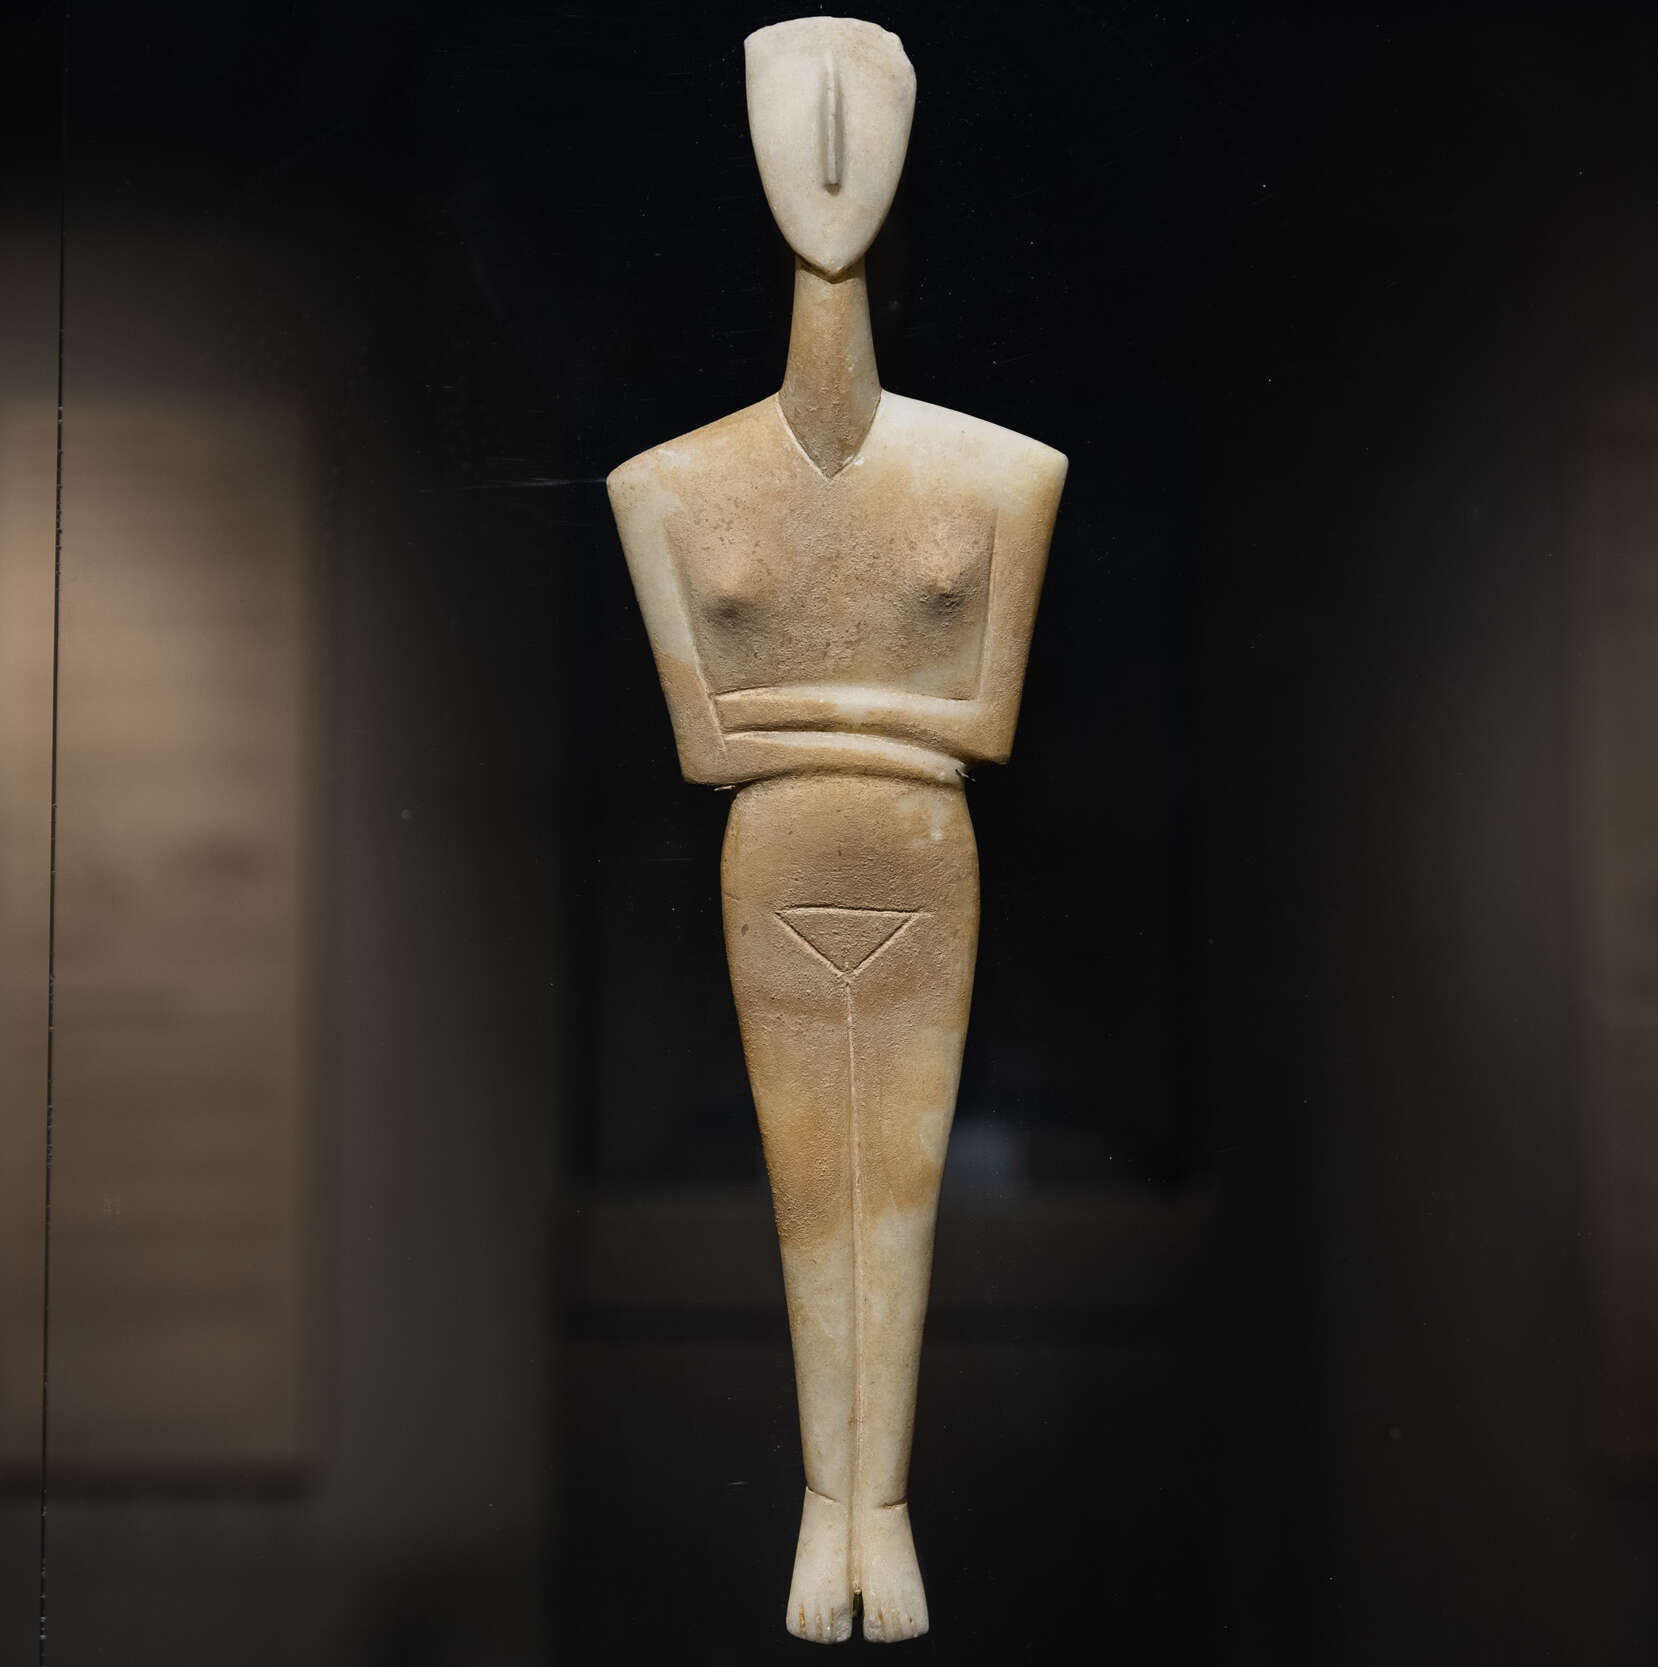 photo of cycladic figurine inside the exhibition space